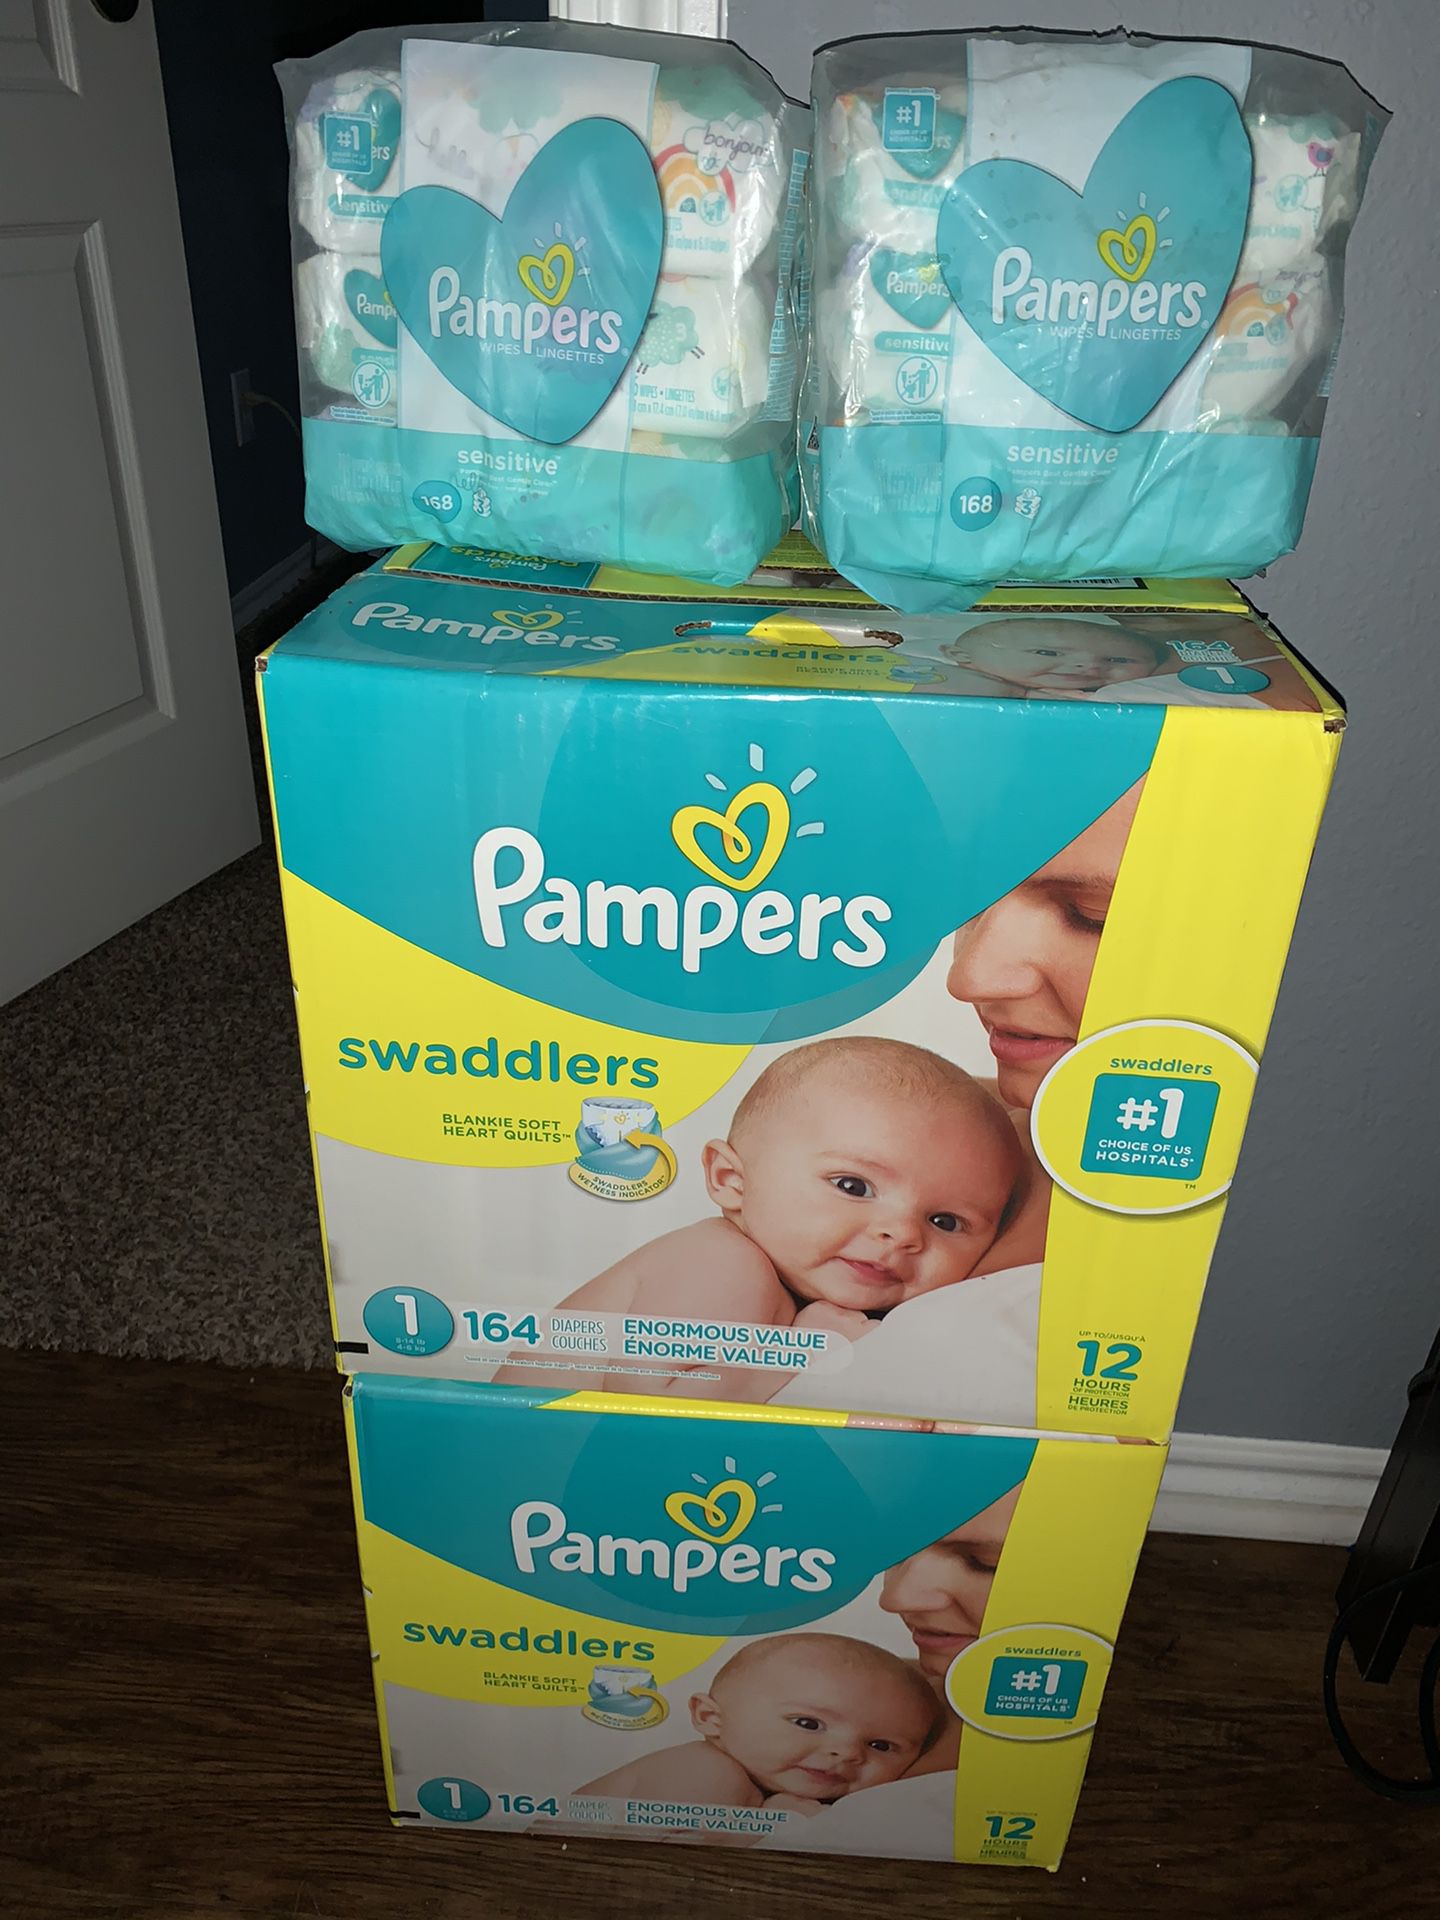 Pampers diapers and Pampers wipes